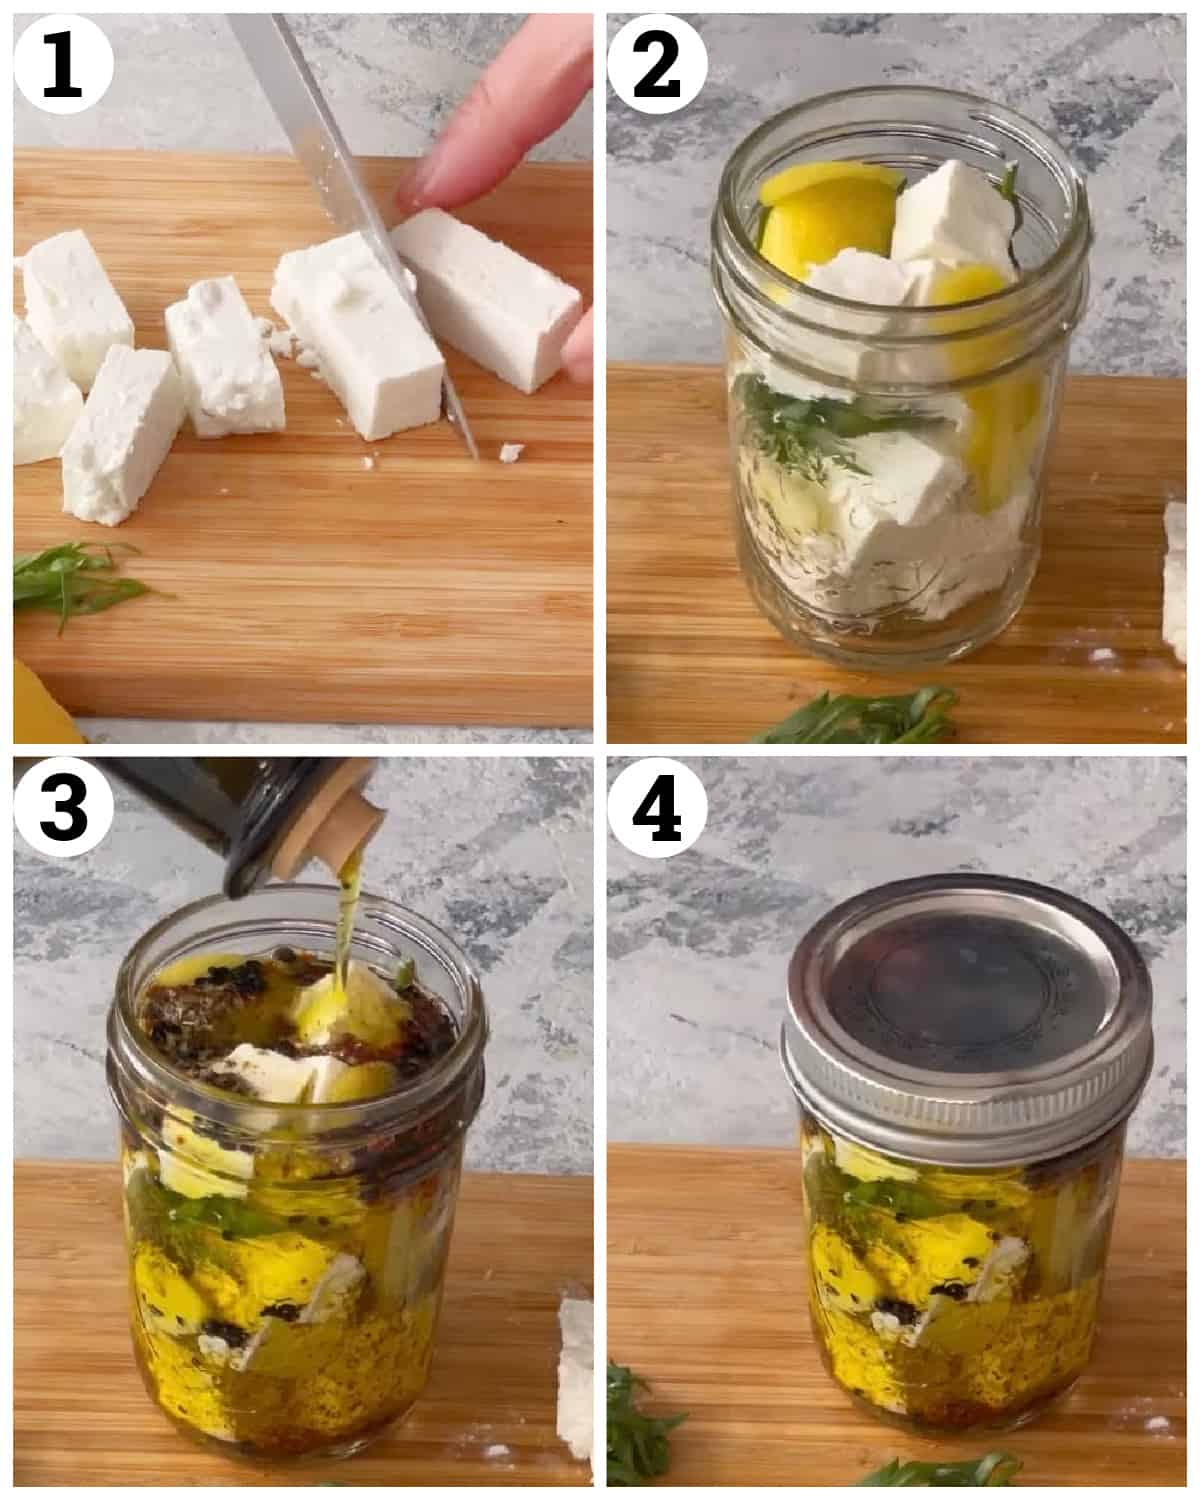 cut the feta into cubes and place in a jar then add the lemon peel and herbs plus the spices. Top with olive oil and marinate for a few hours. 